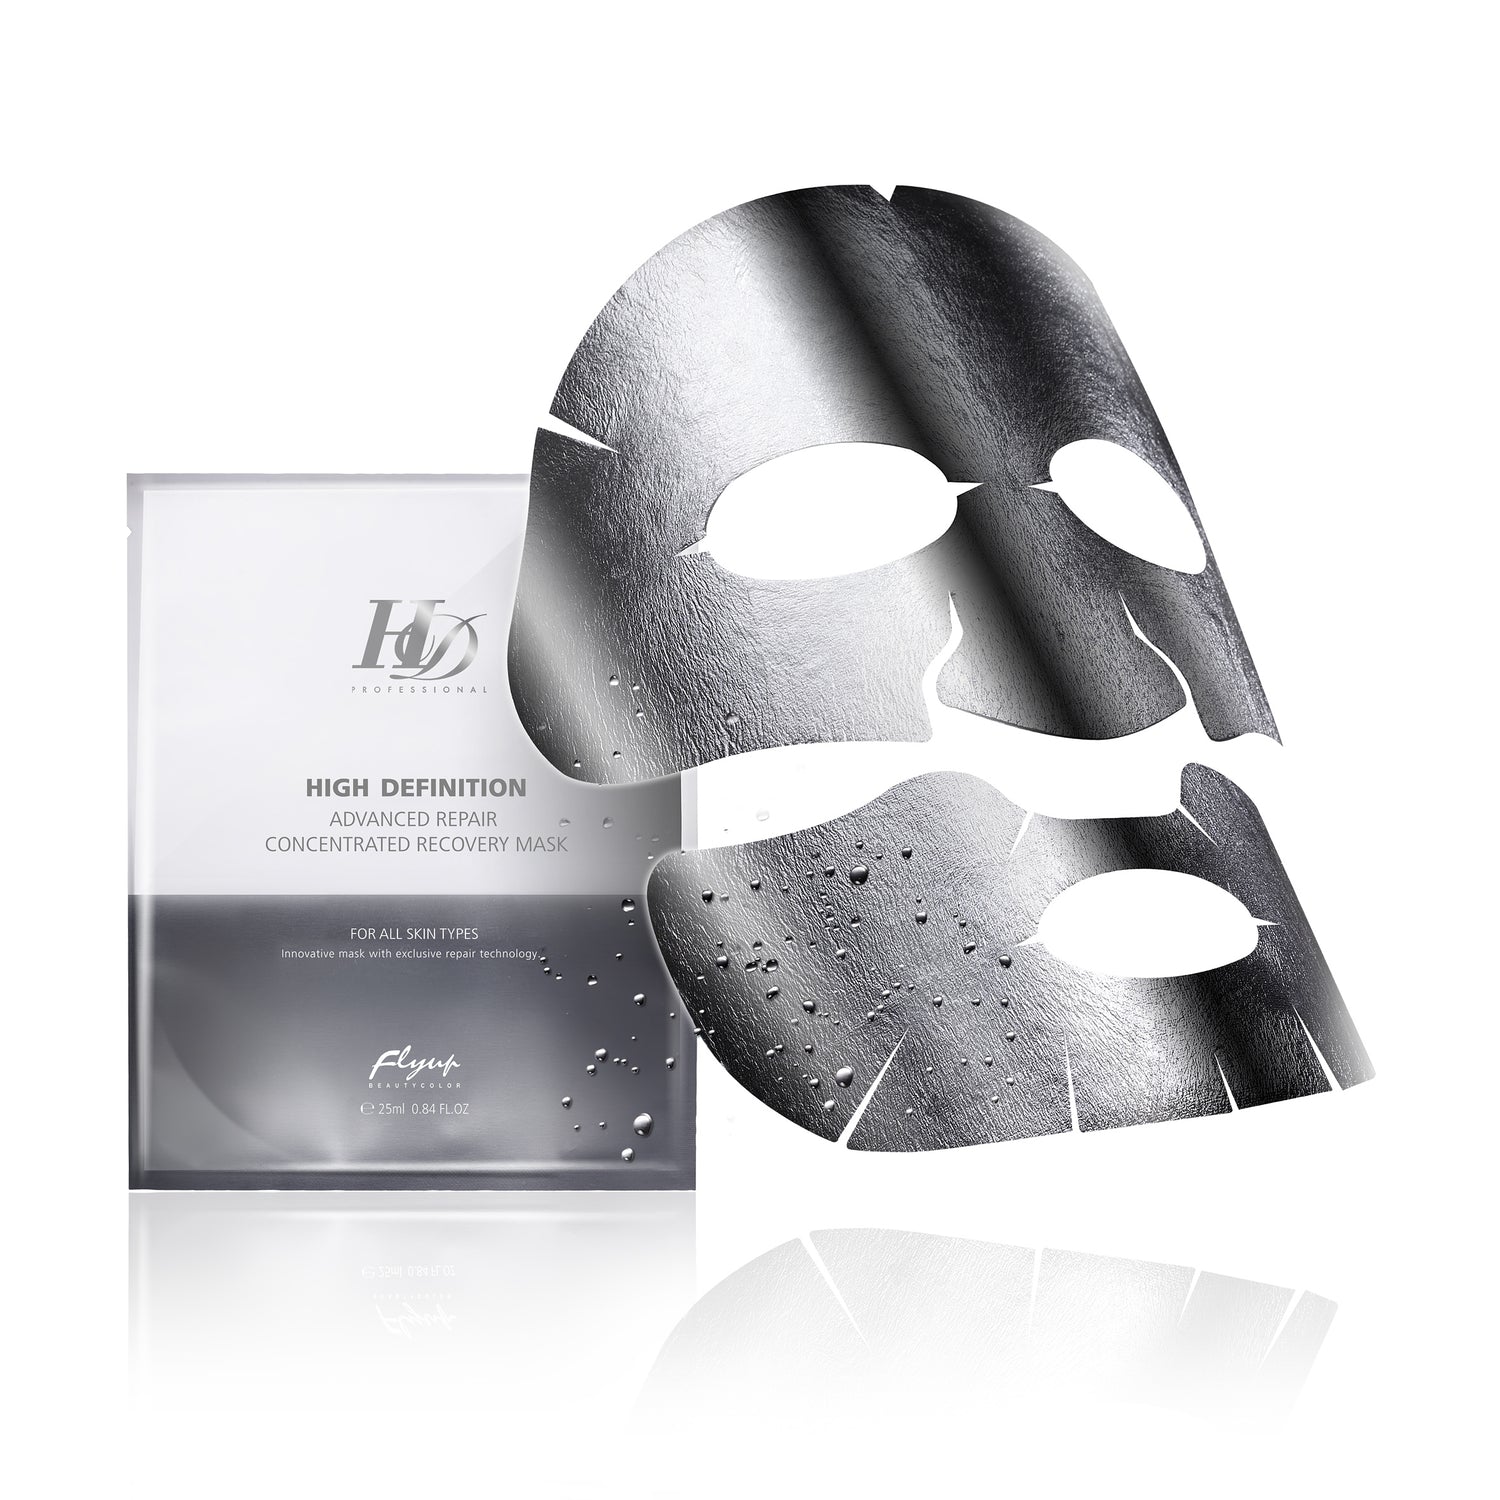 HD Advanced Repair Concentrated Recovery Mask - KatTong